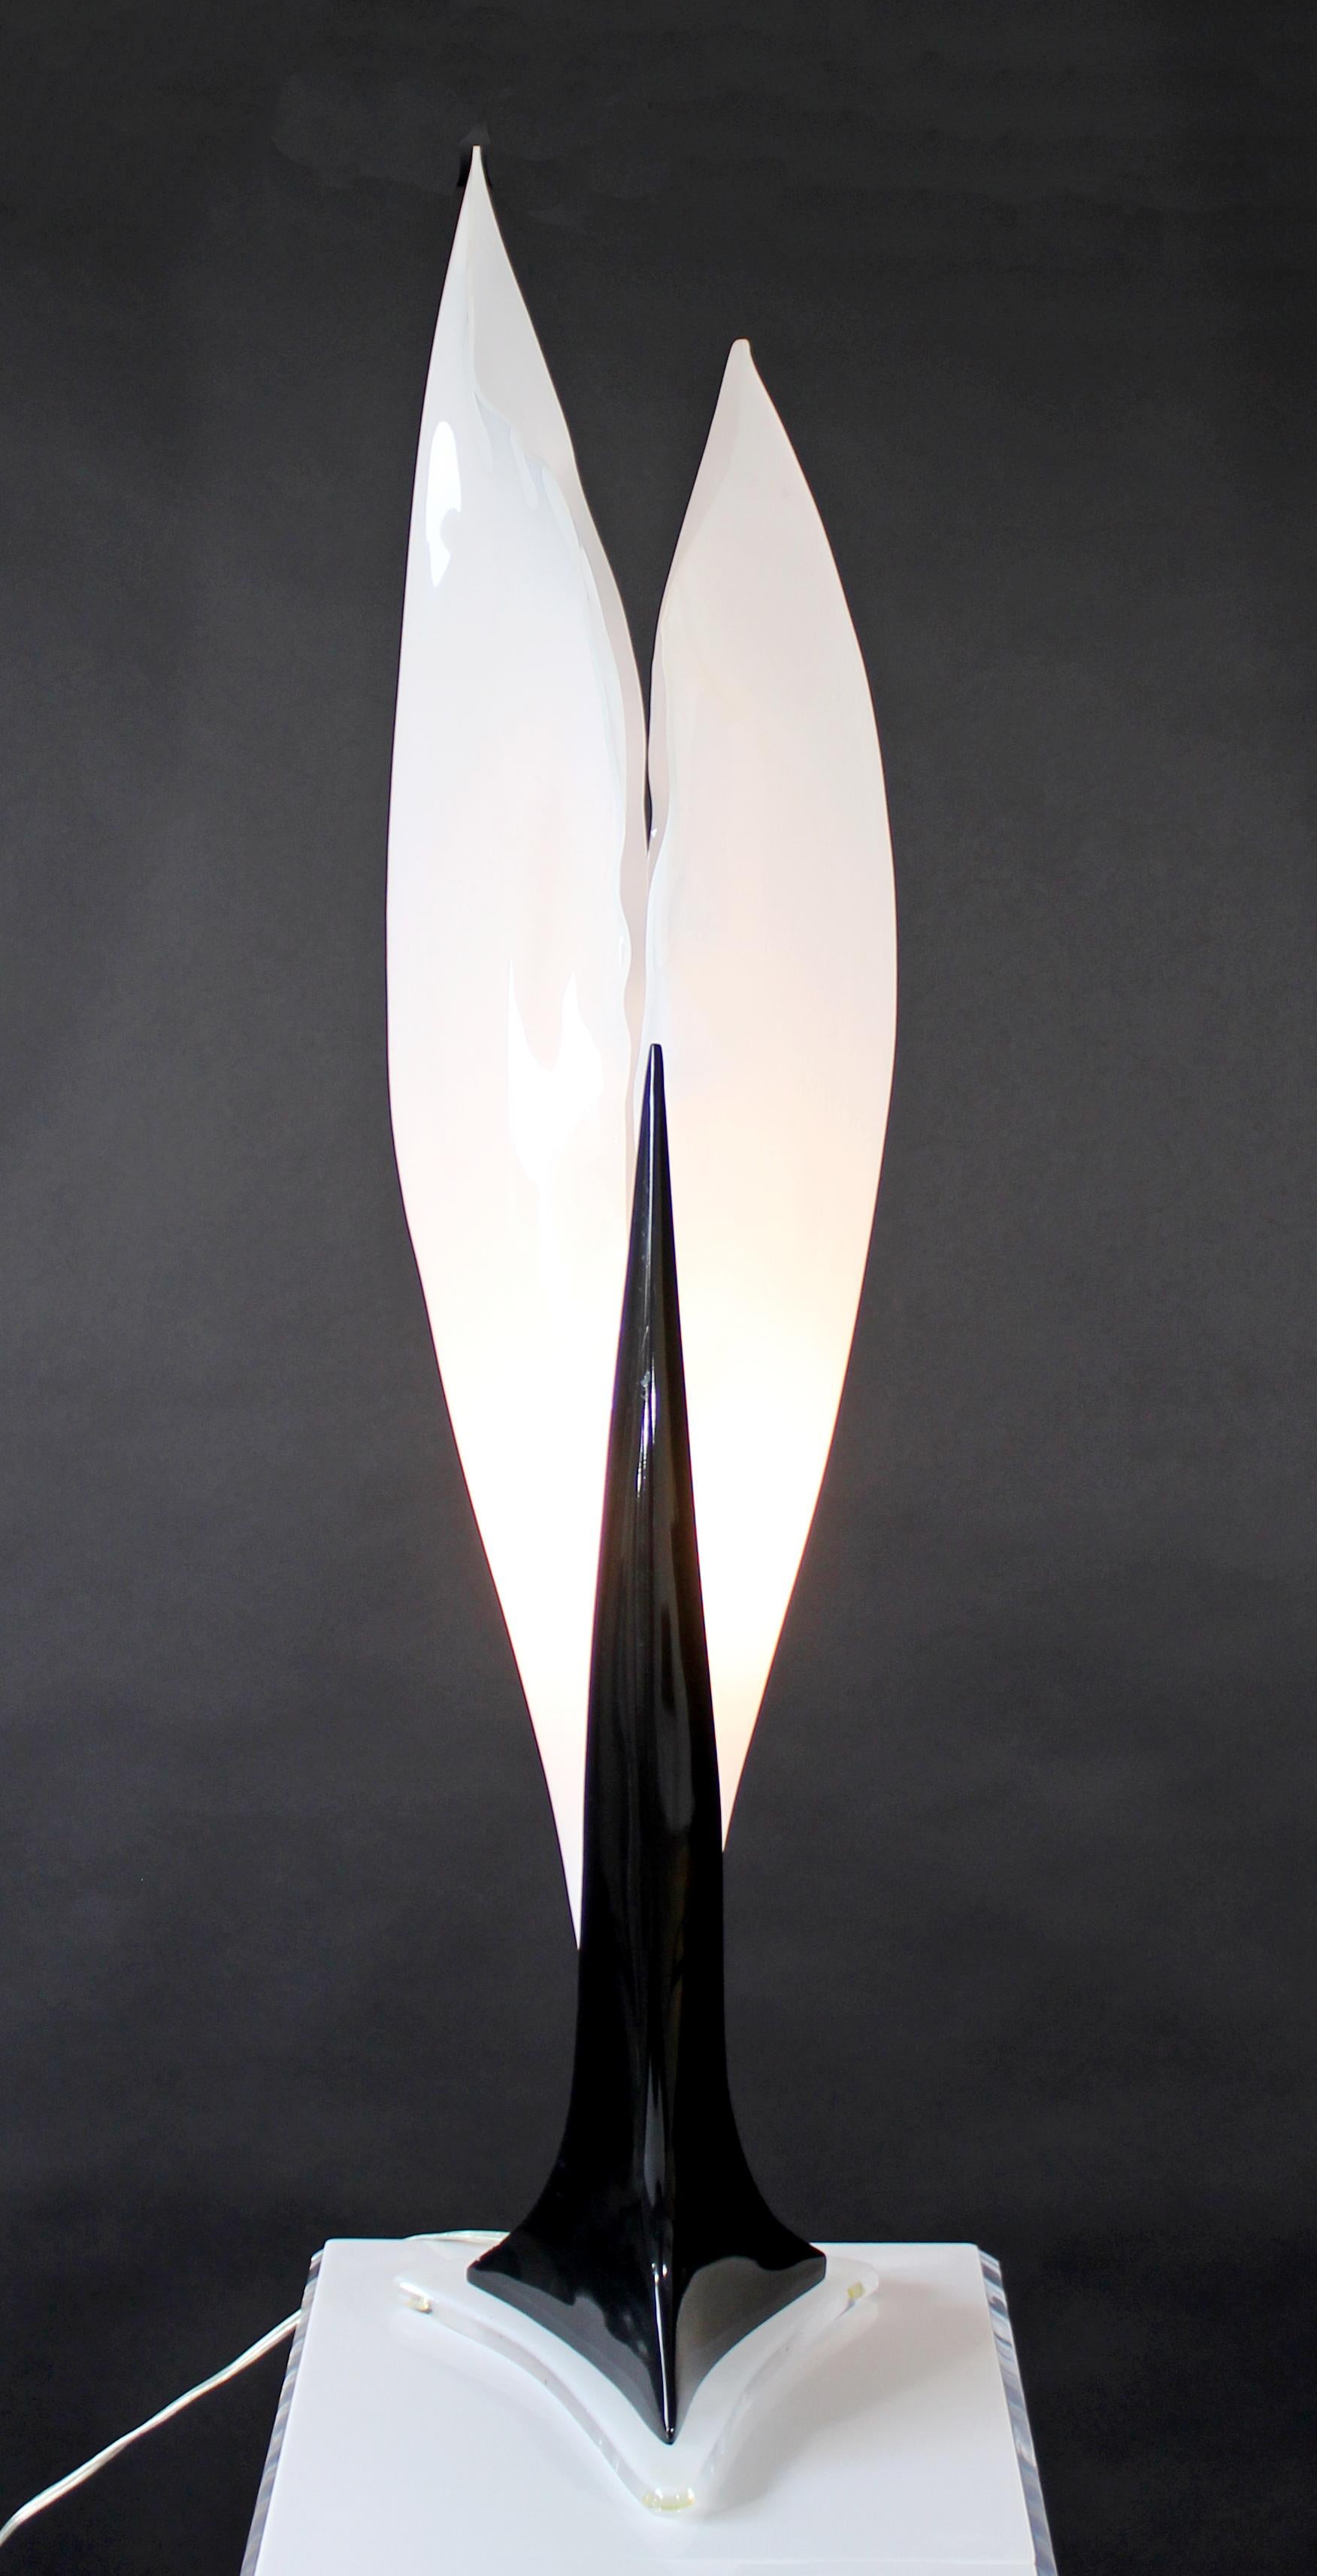 For your consideration is a delicate looking, acrylic flower table lamp, in the Rougier style, circa the 1980s. In good condition. The dimensions are 9.5